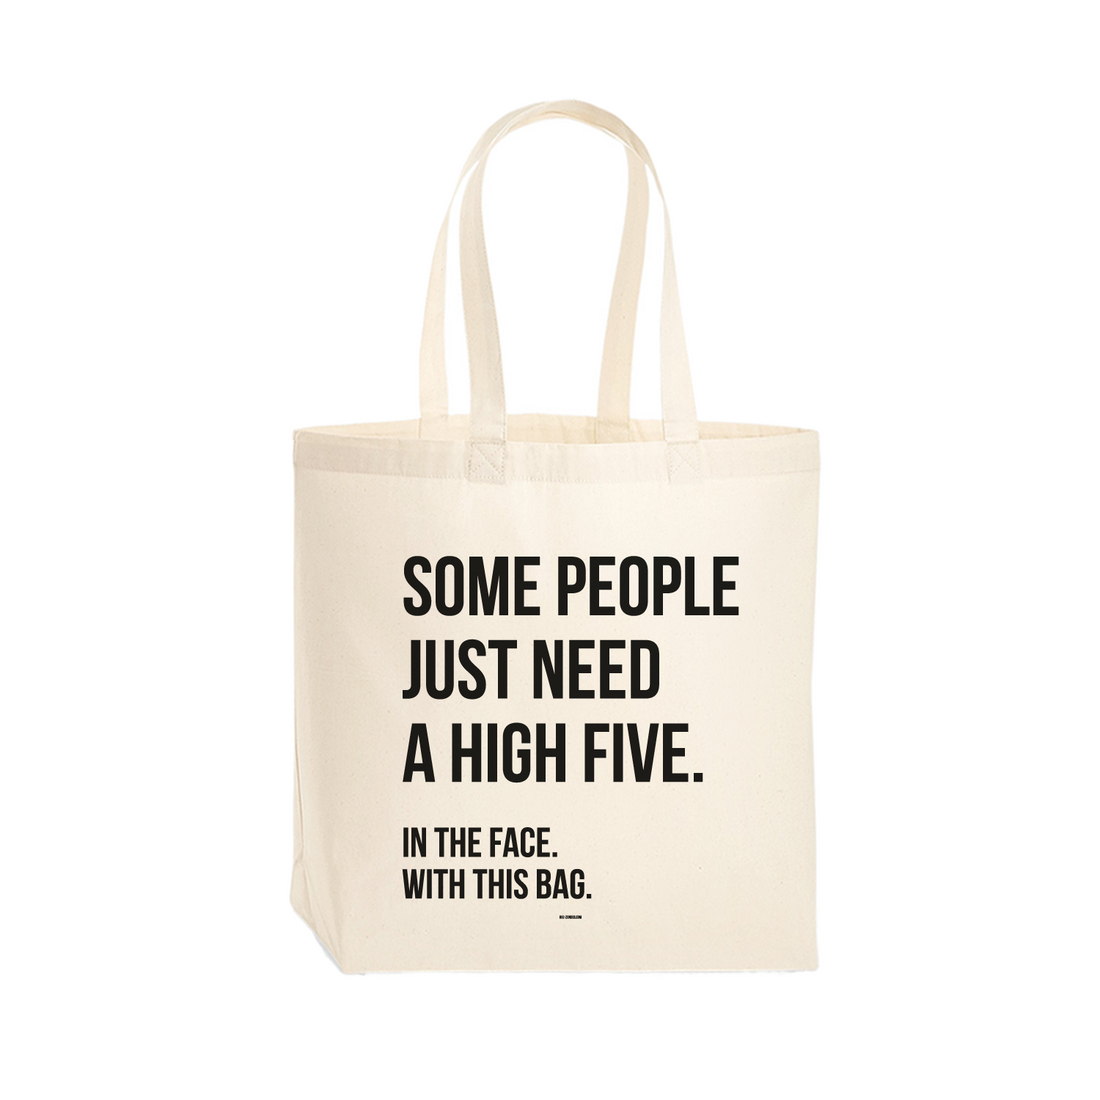 Cotton bag - Some people just need a high five in the face with this bag